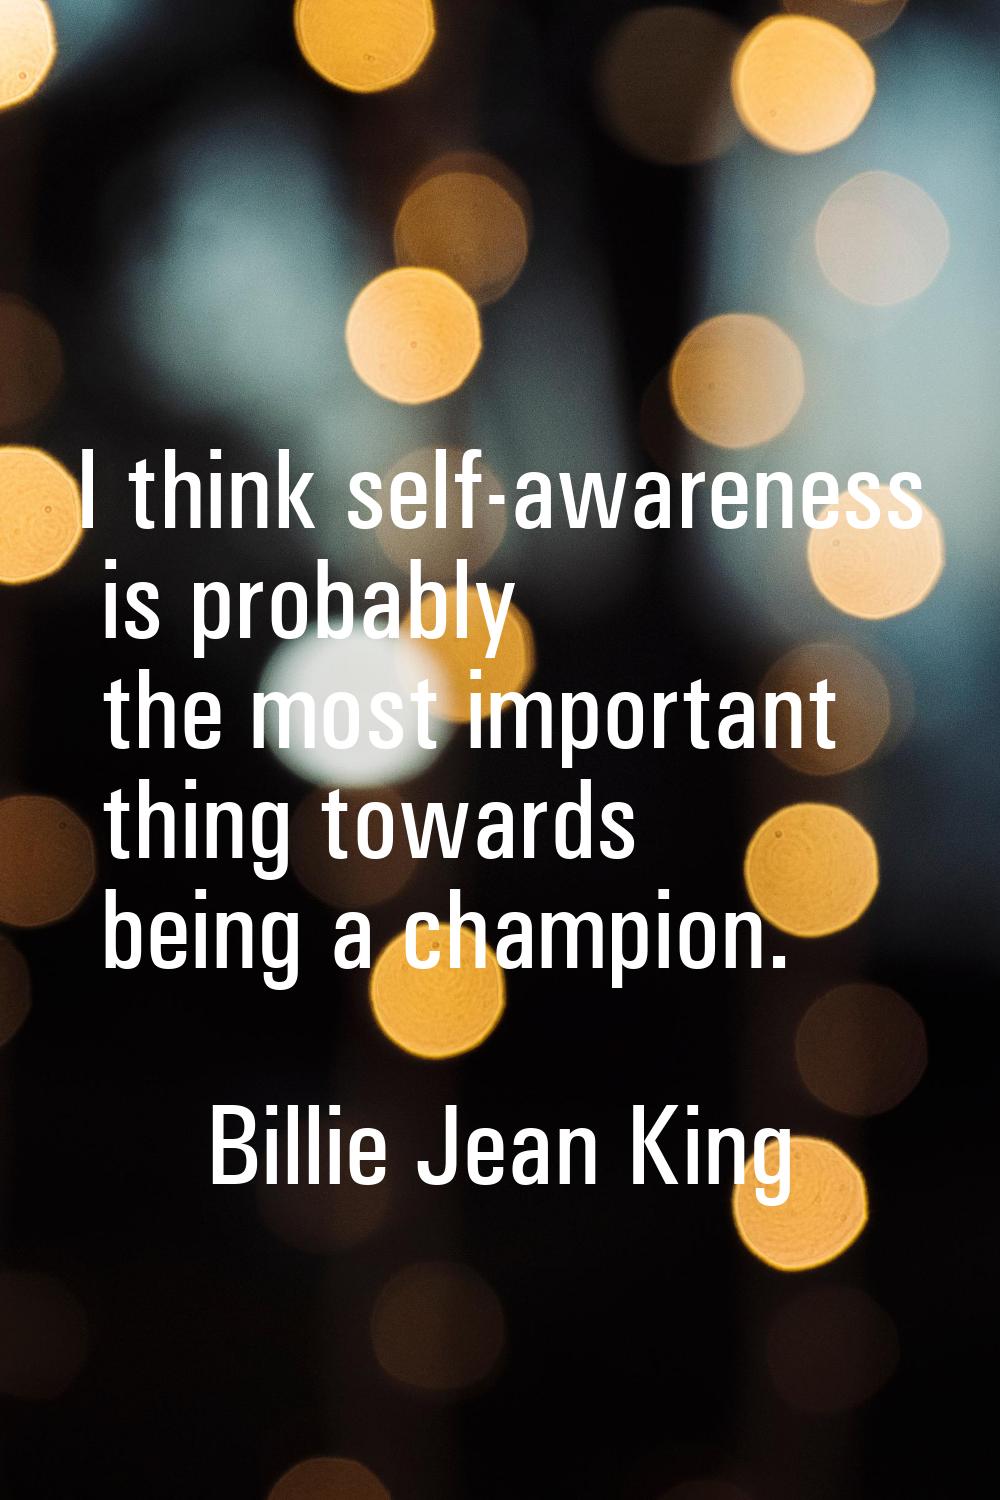 I think self-awareness is probably the most important thing towards being a champion.